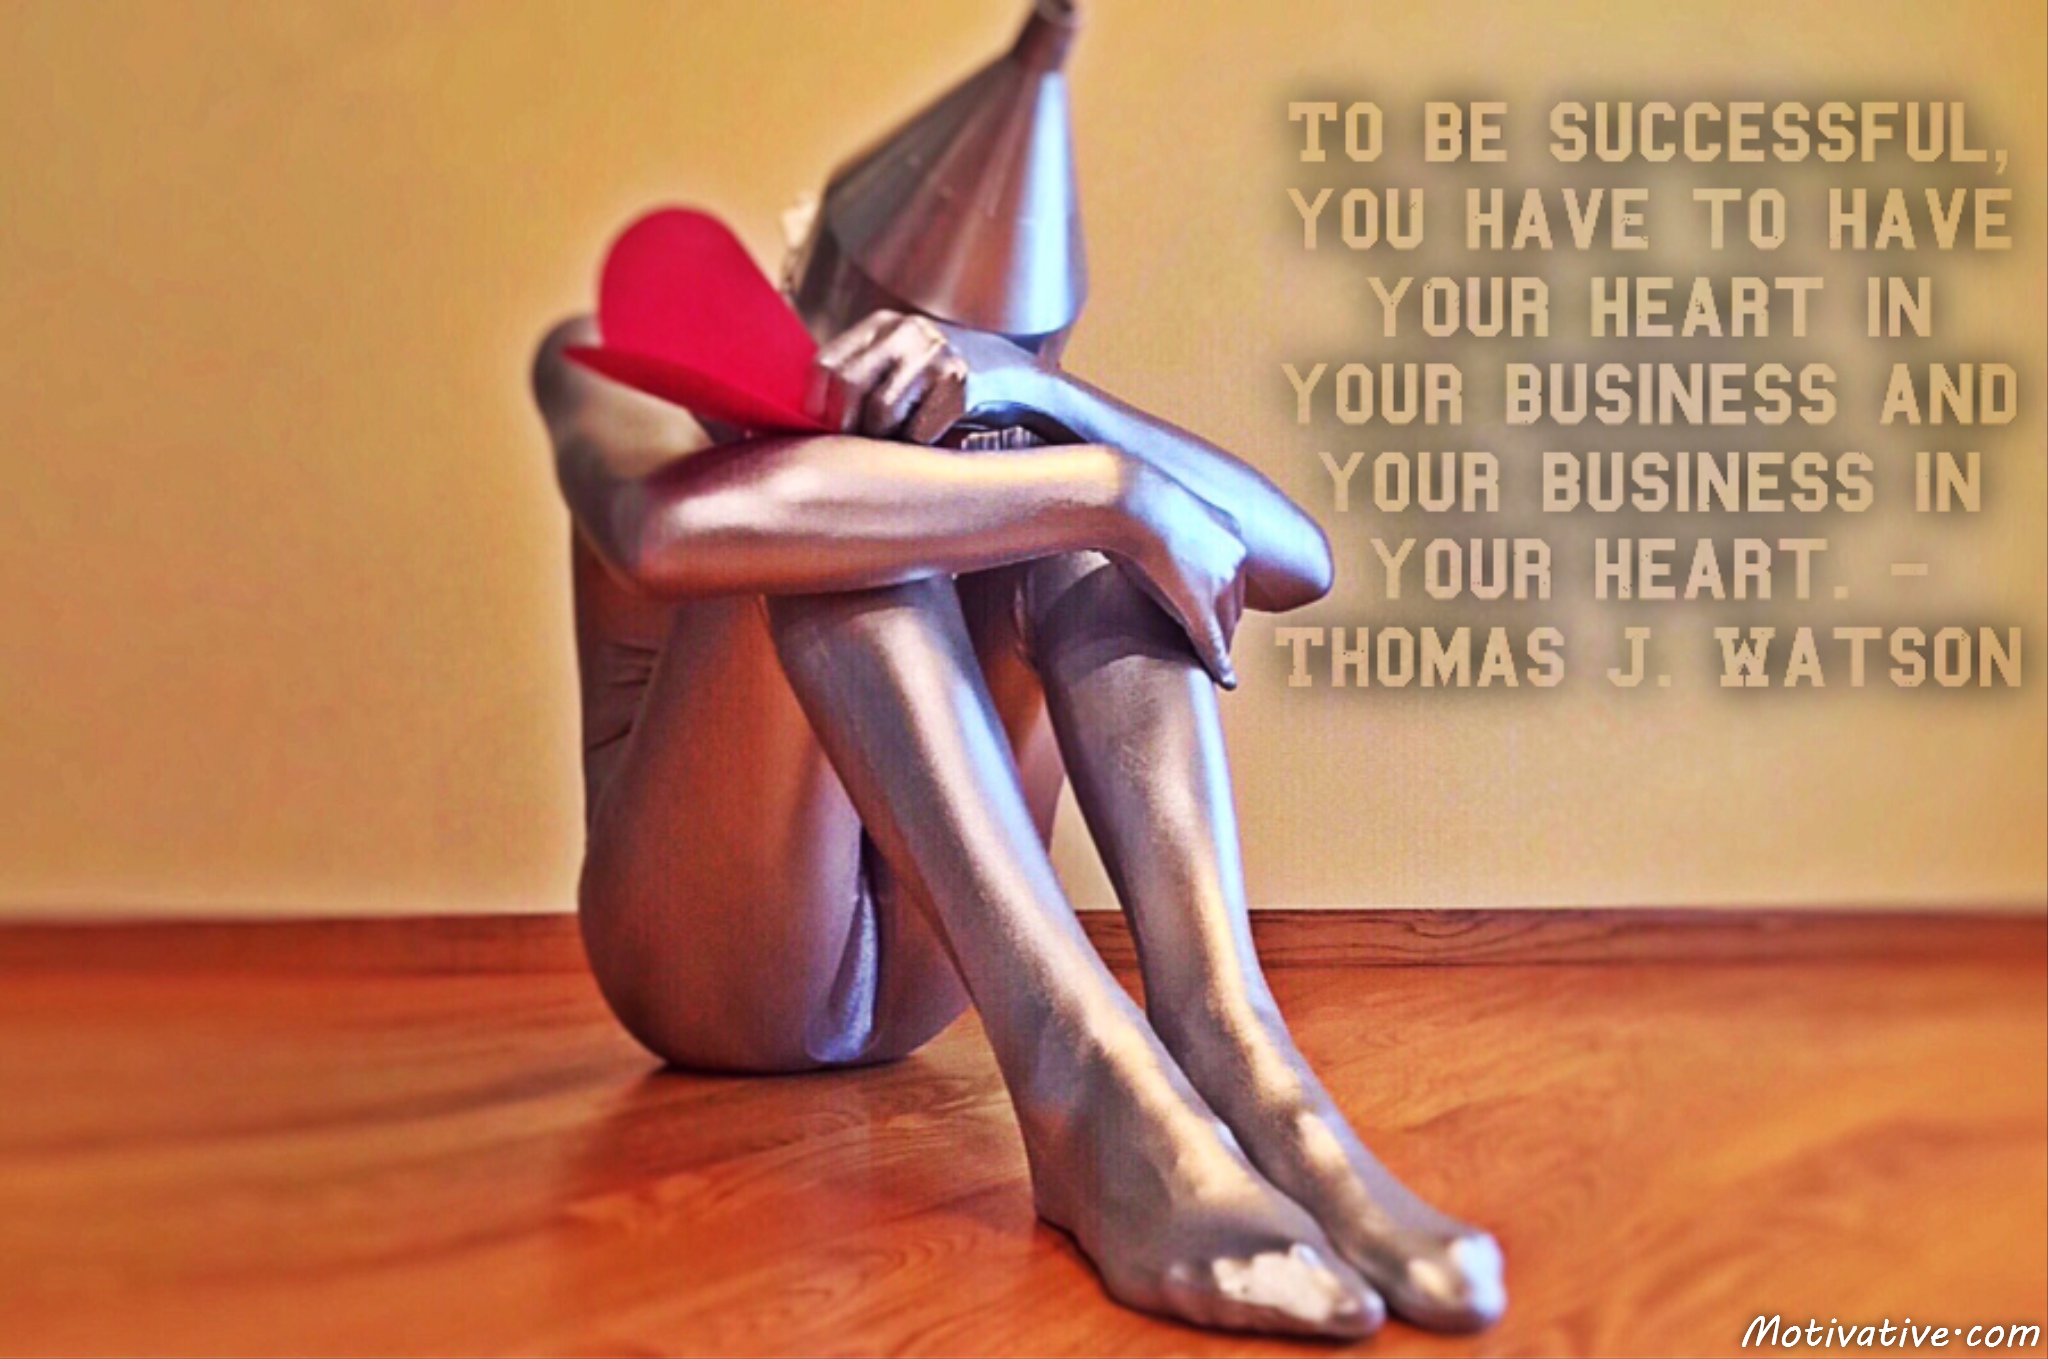 To be successful, you have to have your heart in your business and your business in your heart. – Thomas J. Watson